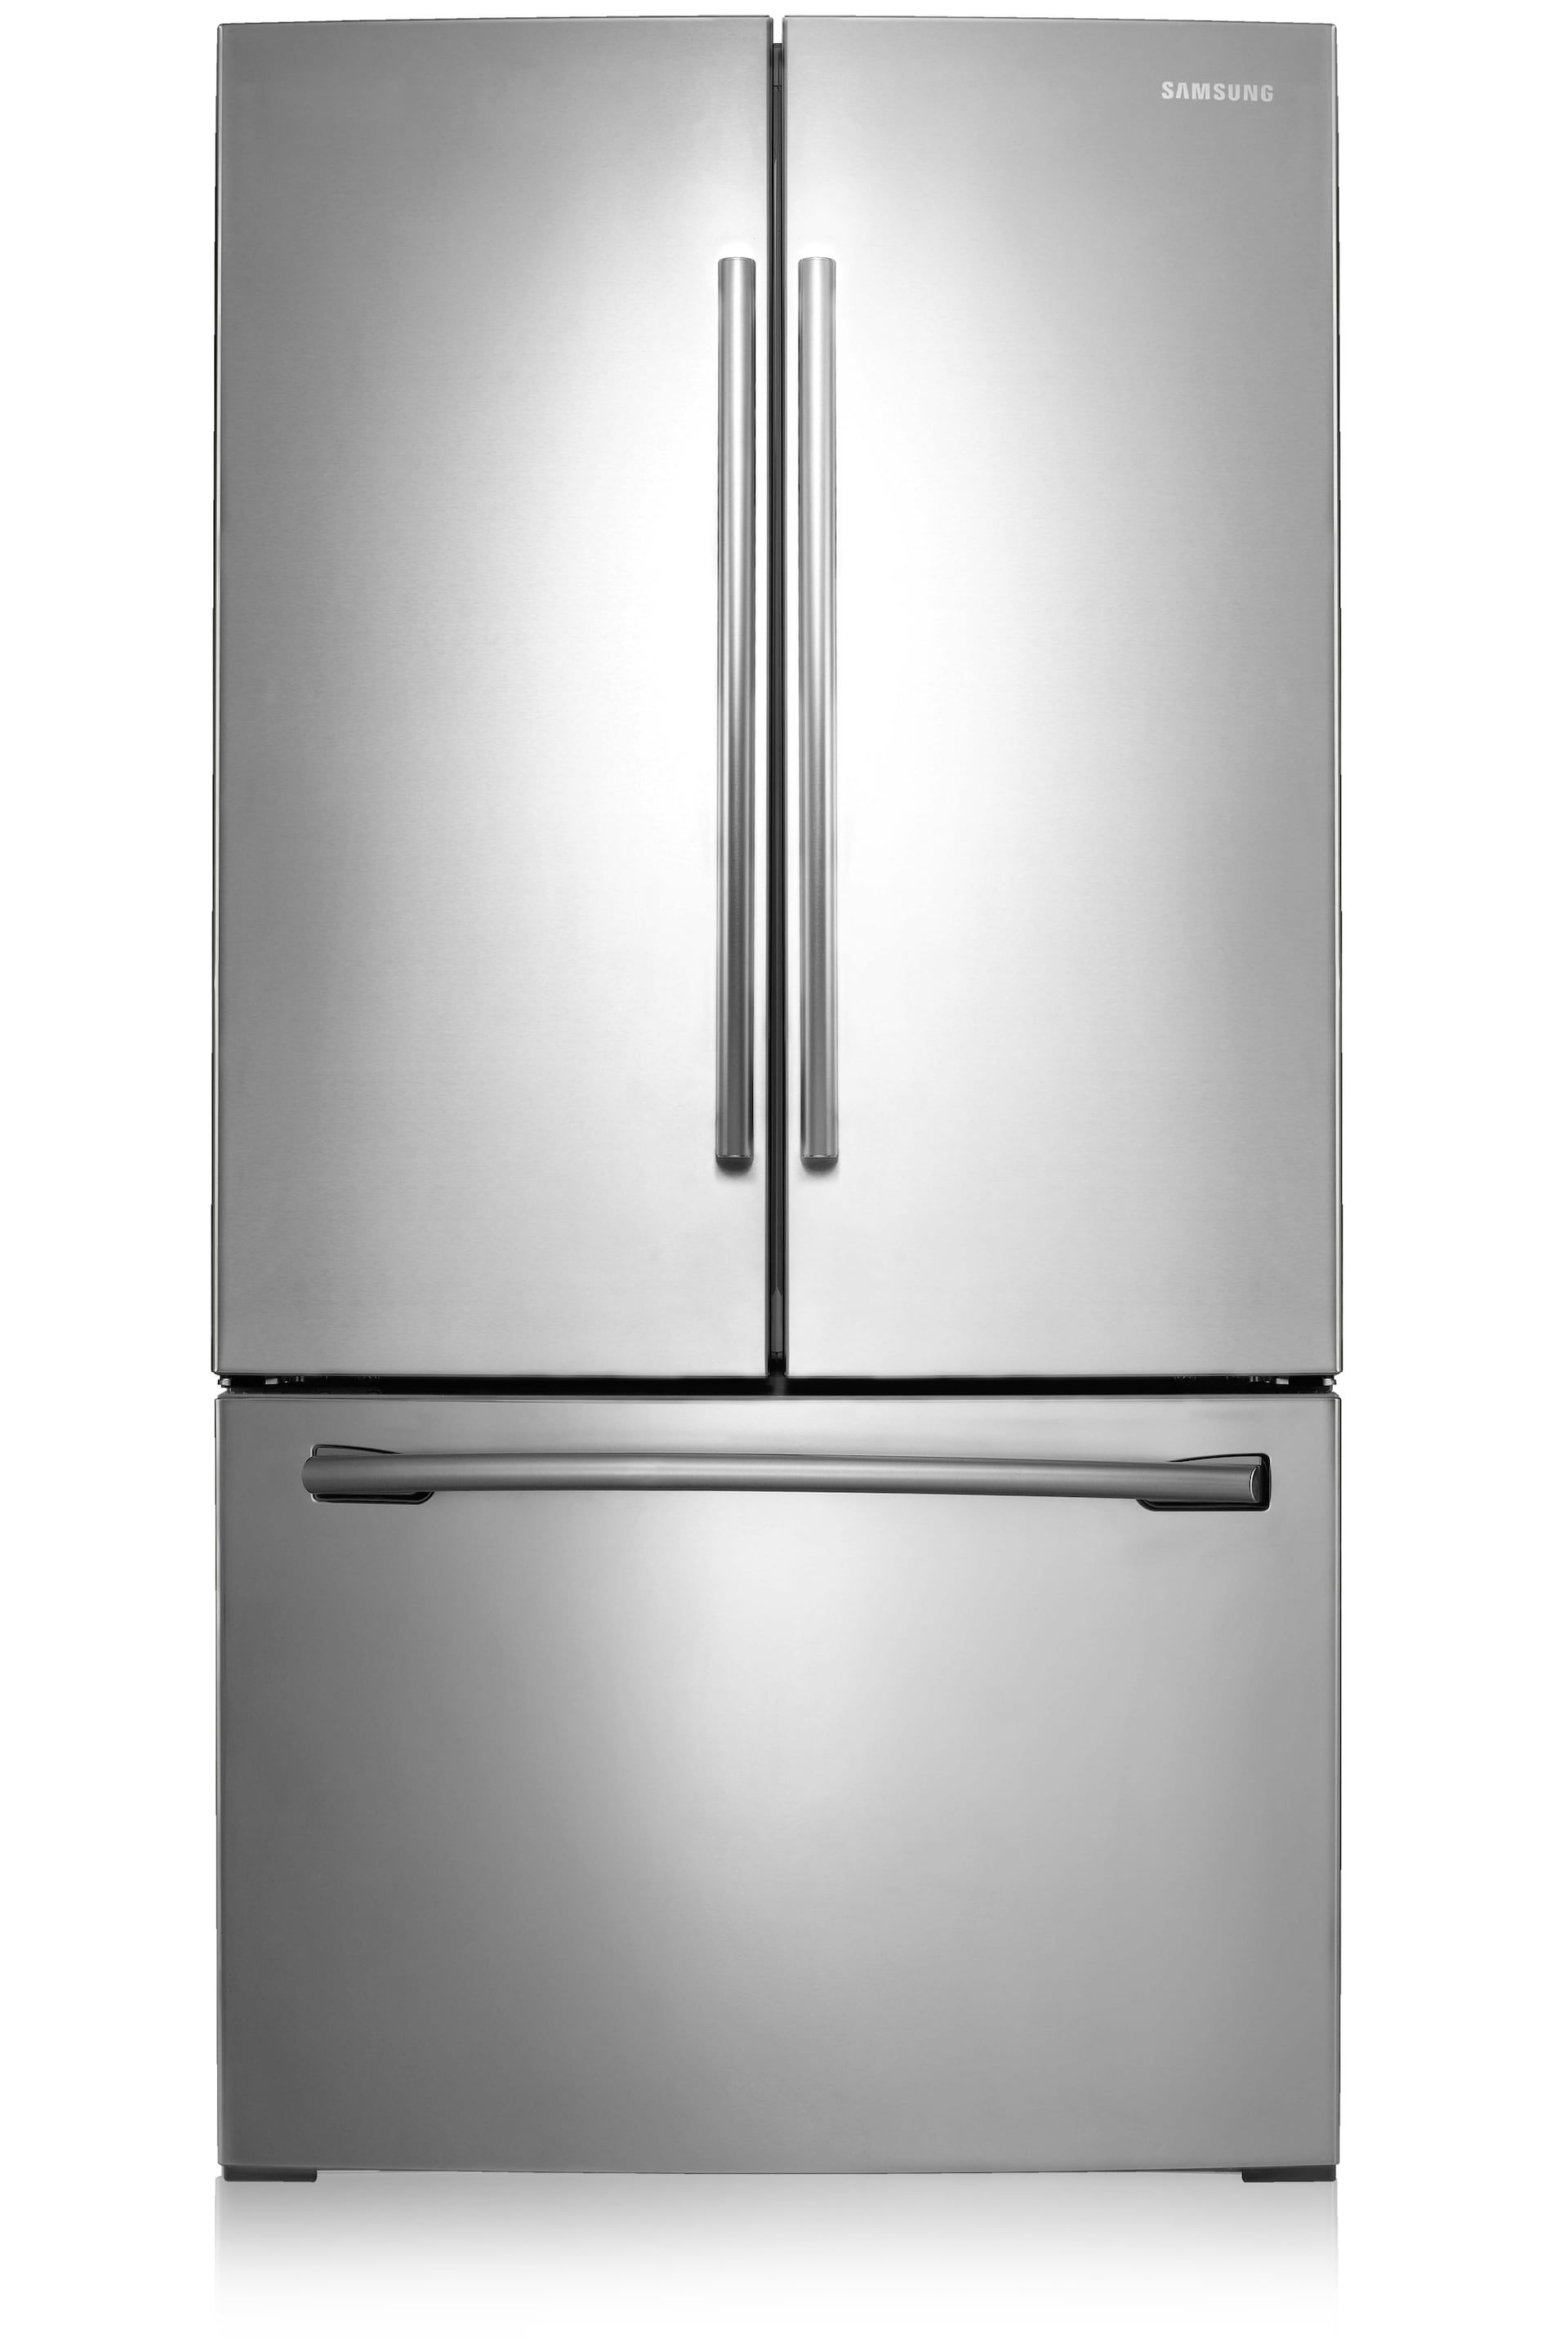 RF261BEAESR French Door Refrigerator with Twin Cooling Plus, 25.6 cu.ft